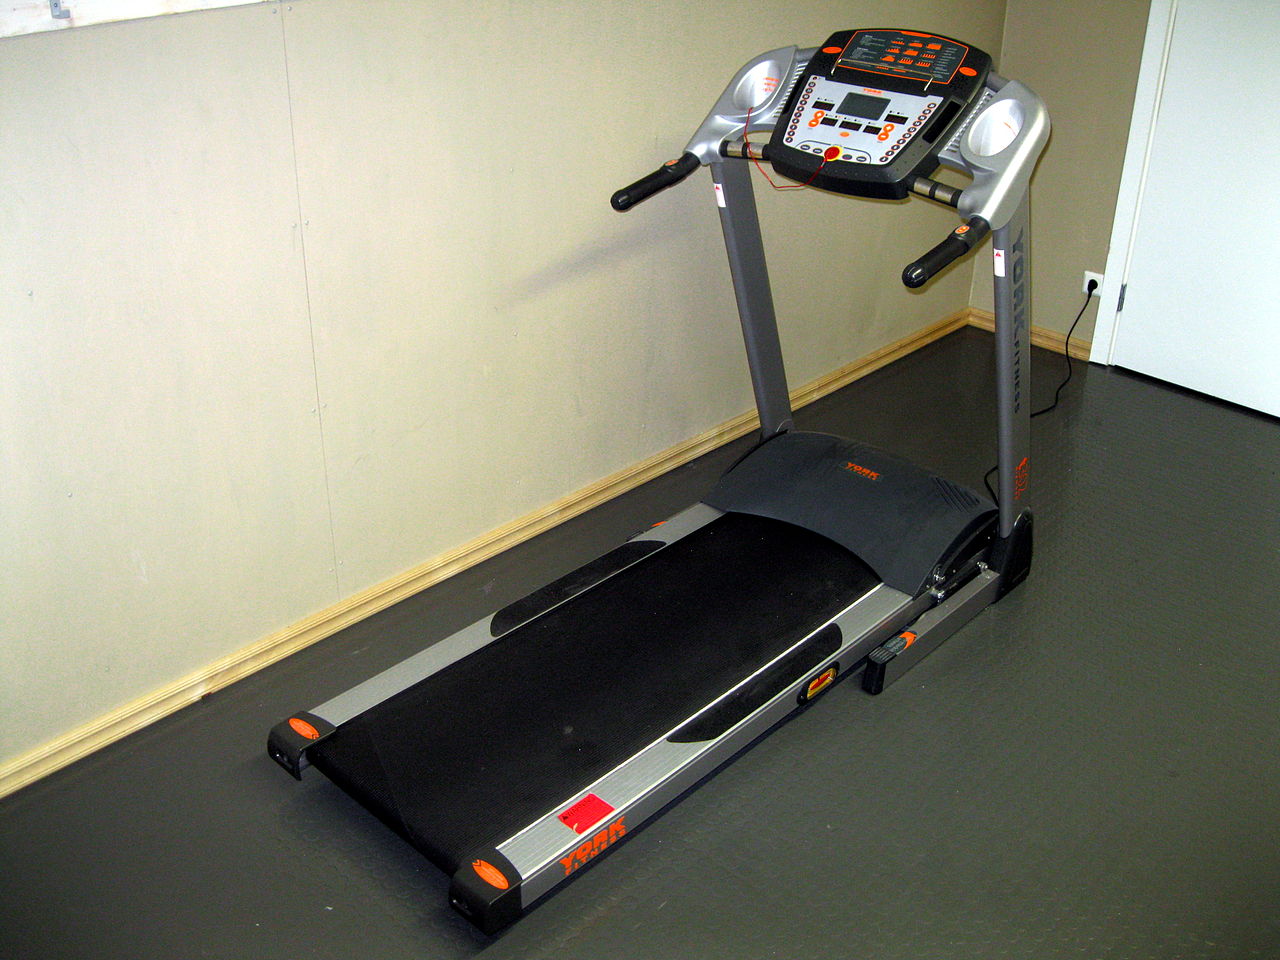 The Most Important Facts to Know about Getting and Exercising on a Treadmill